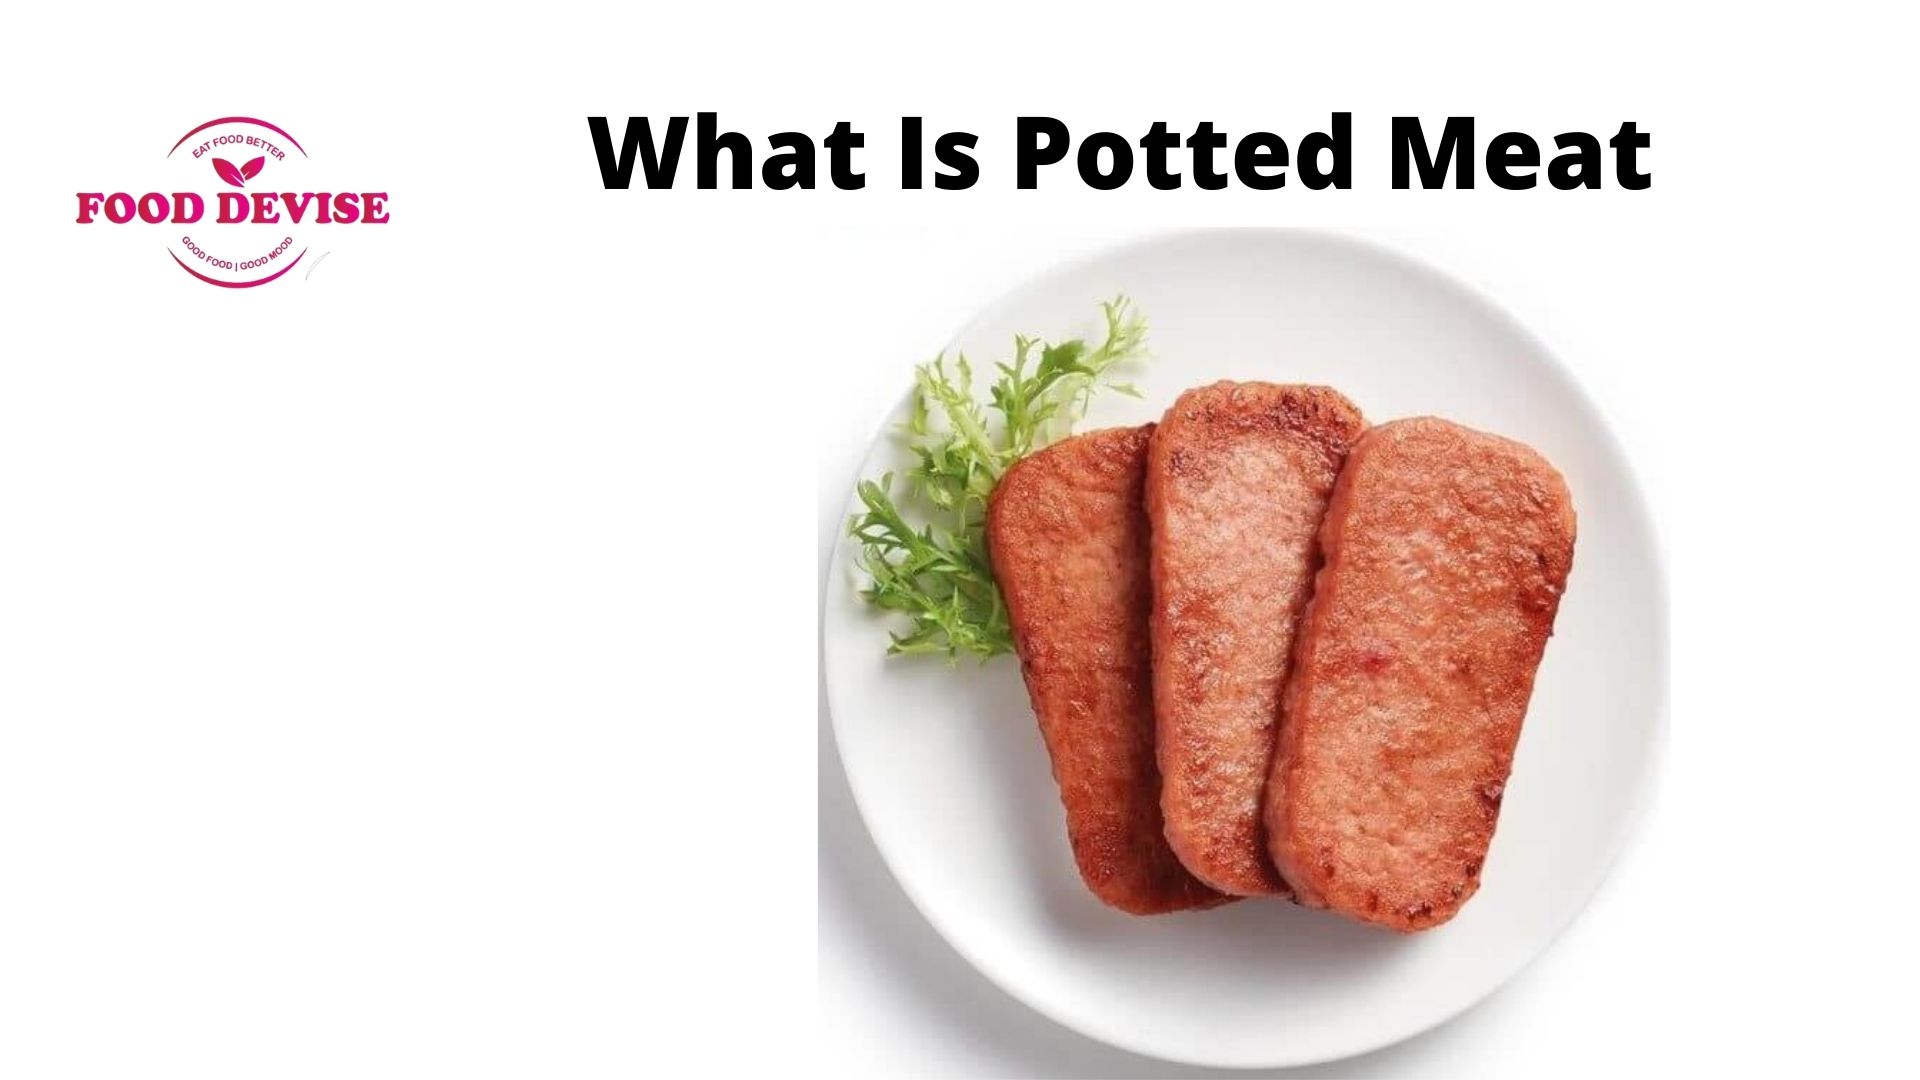 What is Potted Meat?